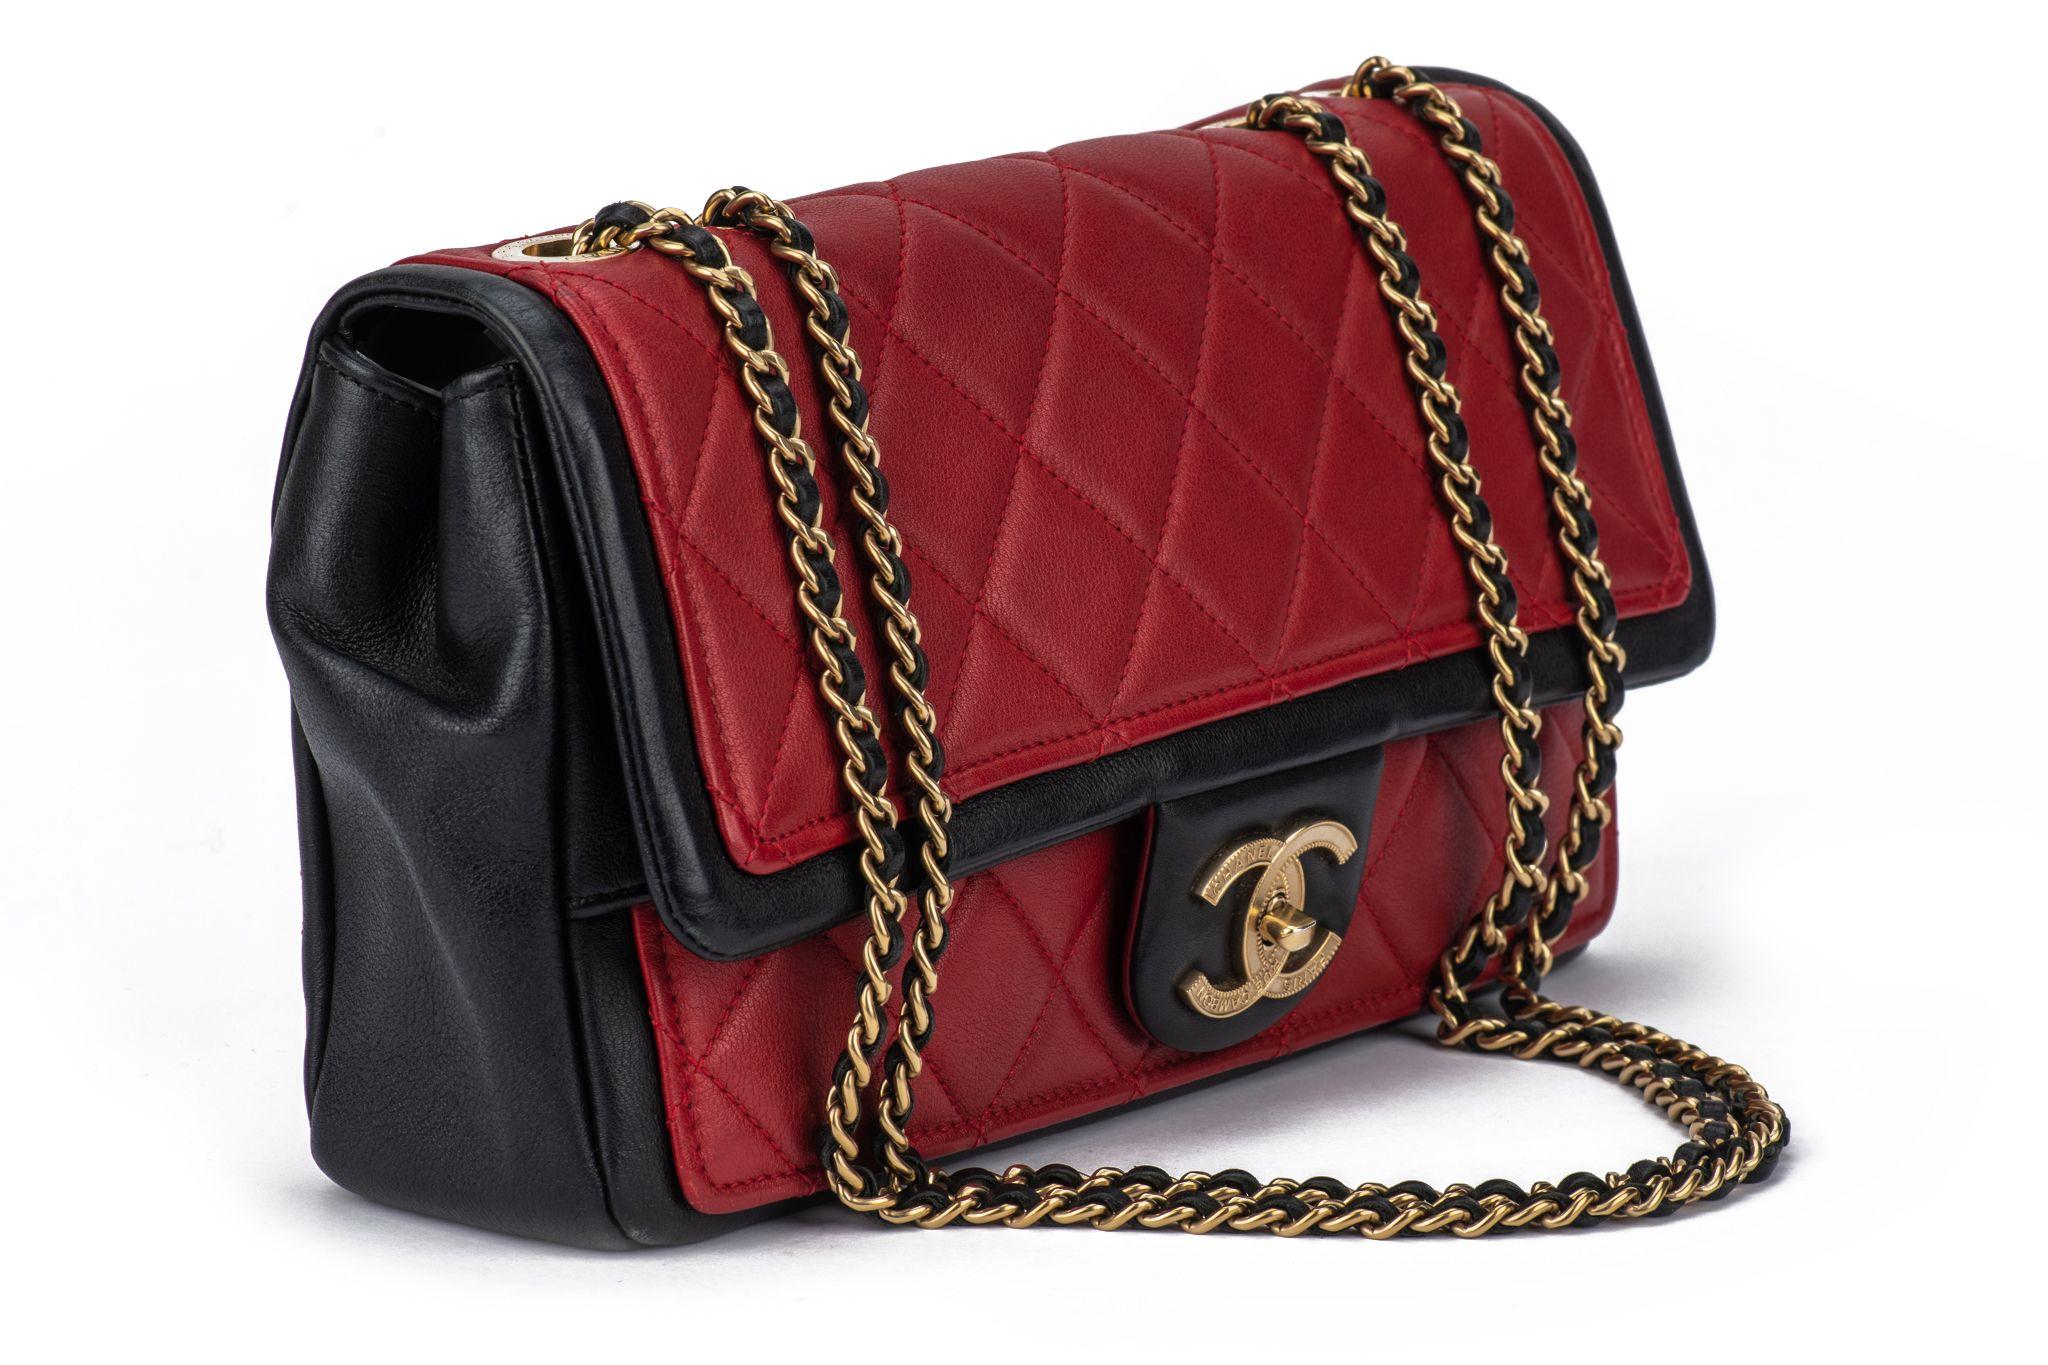 Chanel Graphic Single Flap Bag Black Red For Sale 5